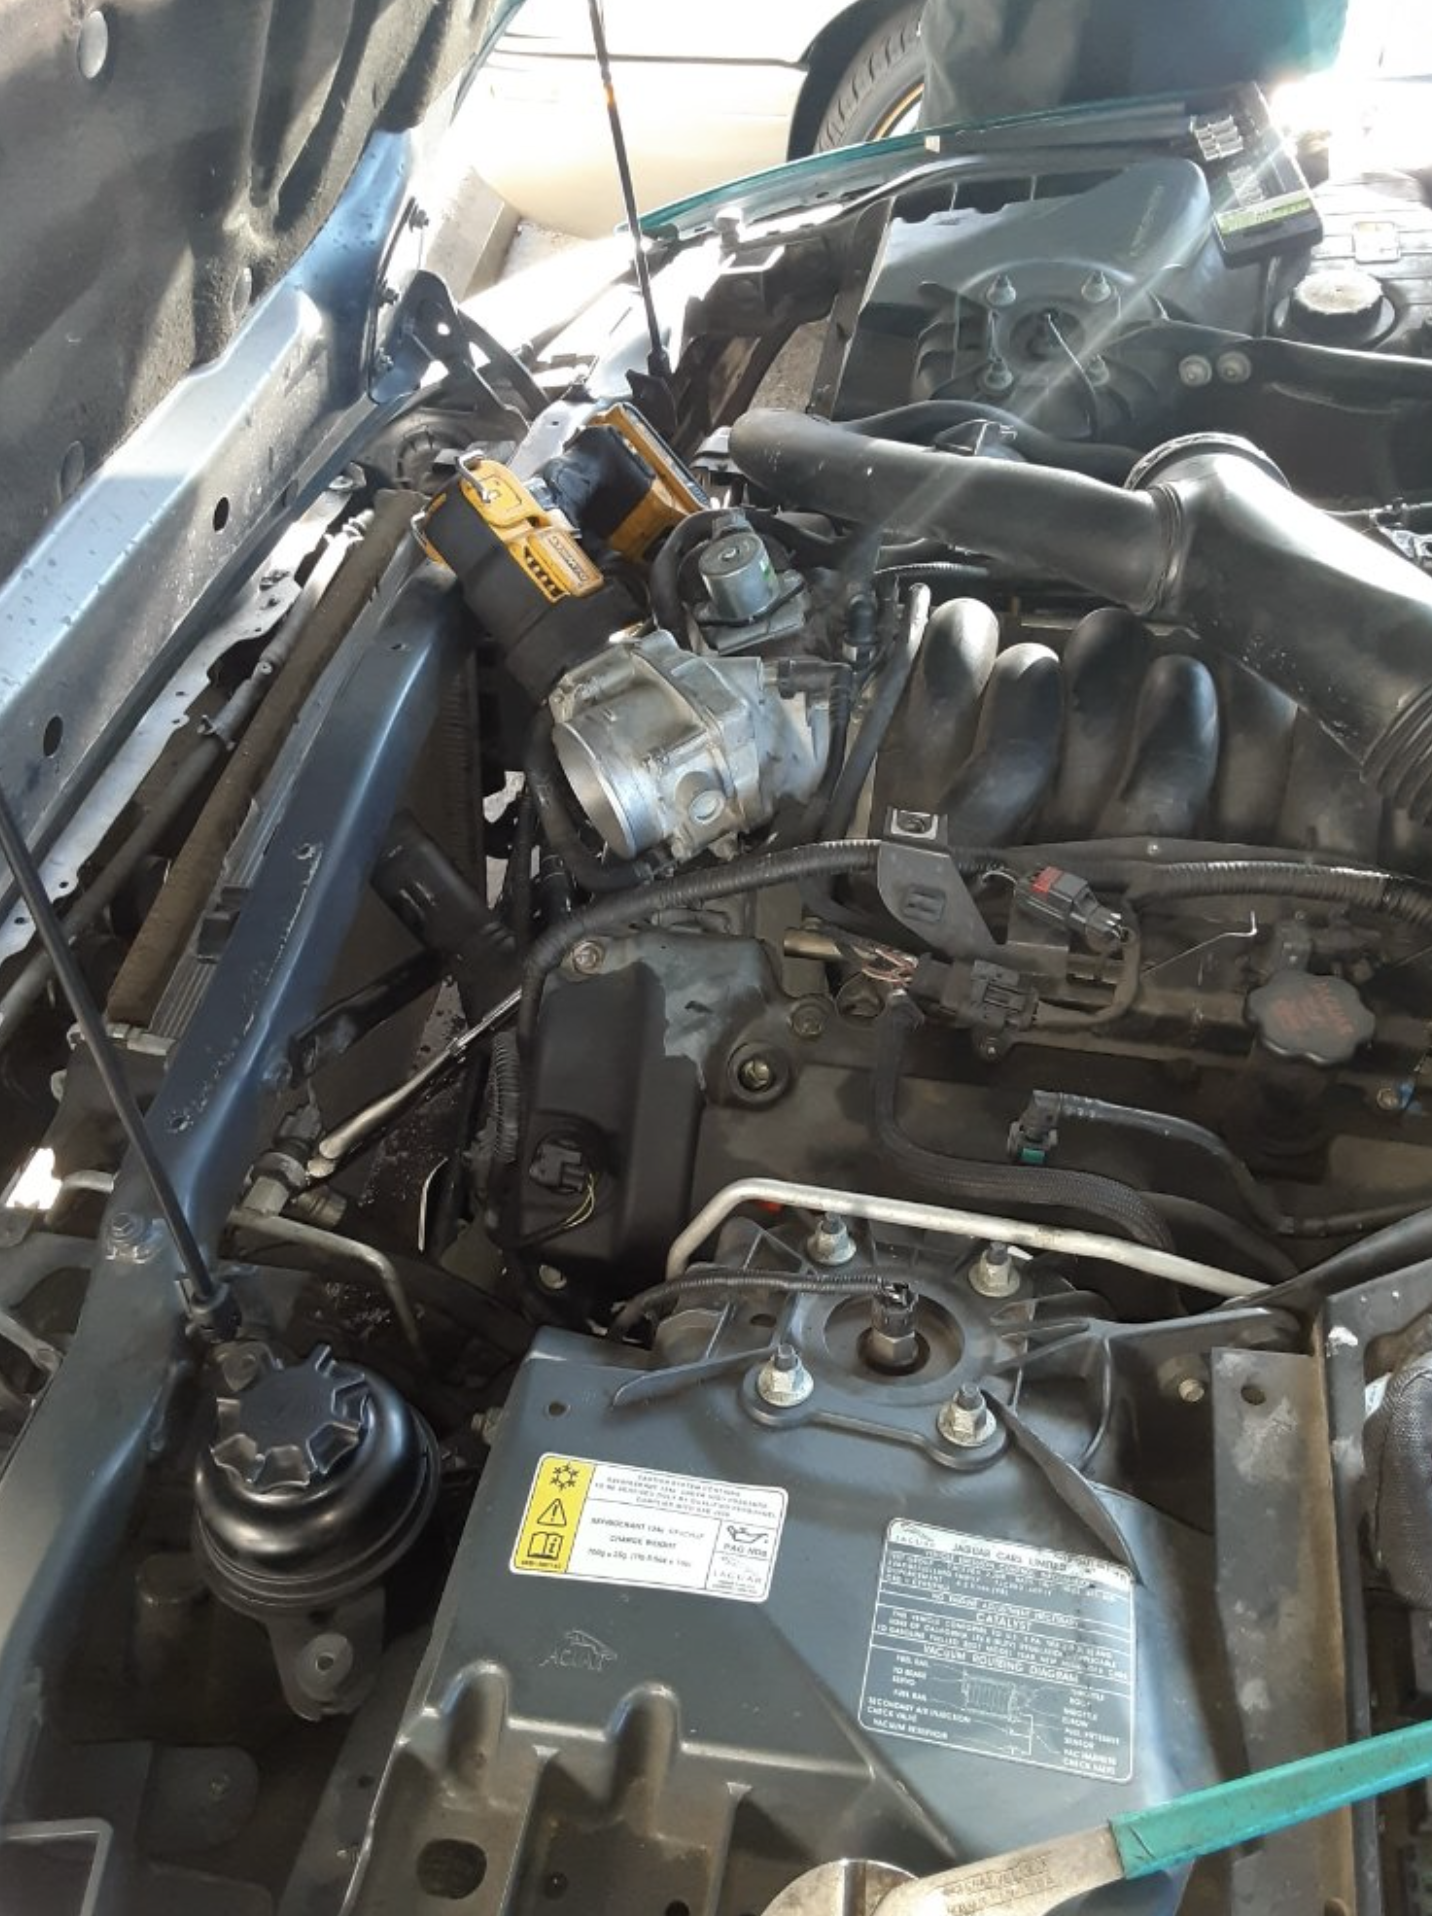 this image shows engine repair services in Fontana, CA